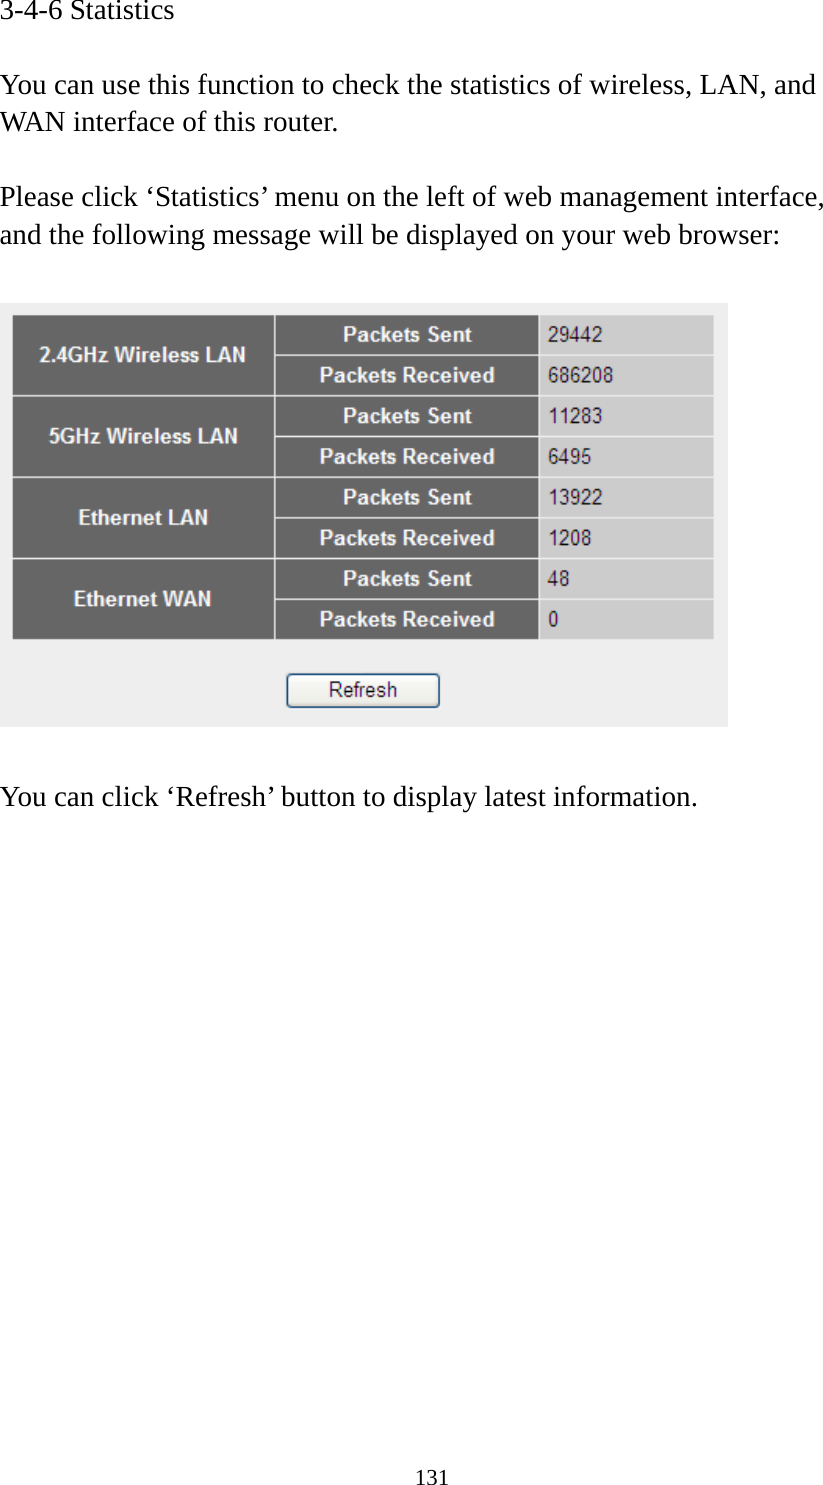 131 3-4-6 Statistics  You can use this function to check the statistics of wireless, LAN, and WAN interface of this router.  Please click ‘Statistics’ menu on the left of web management interface, and the following message will be displayed on your web browser:    You can click ‘Refresh’ button to display latest information. 